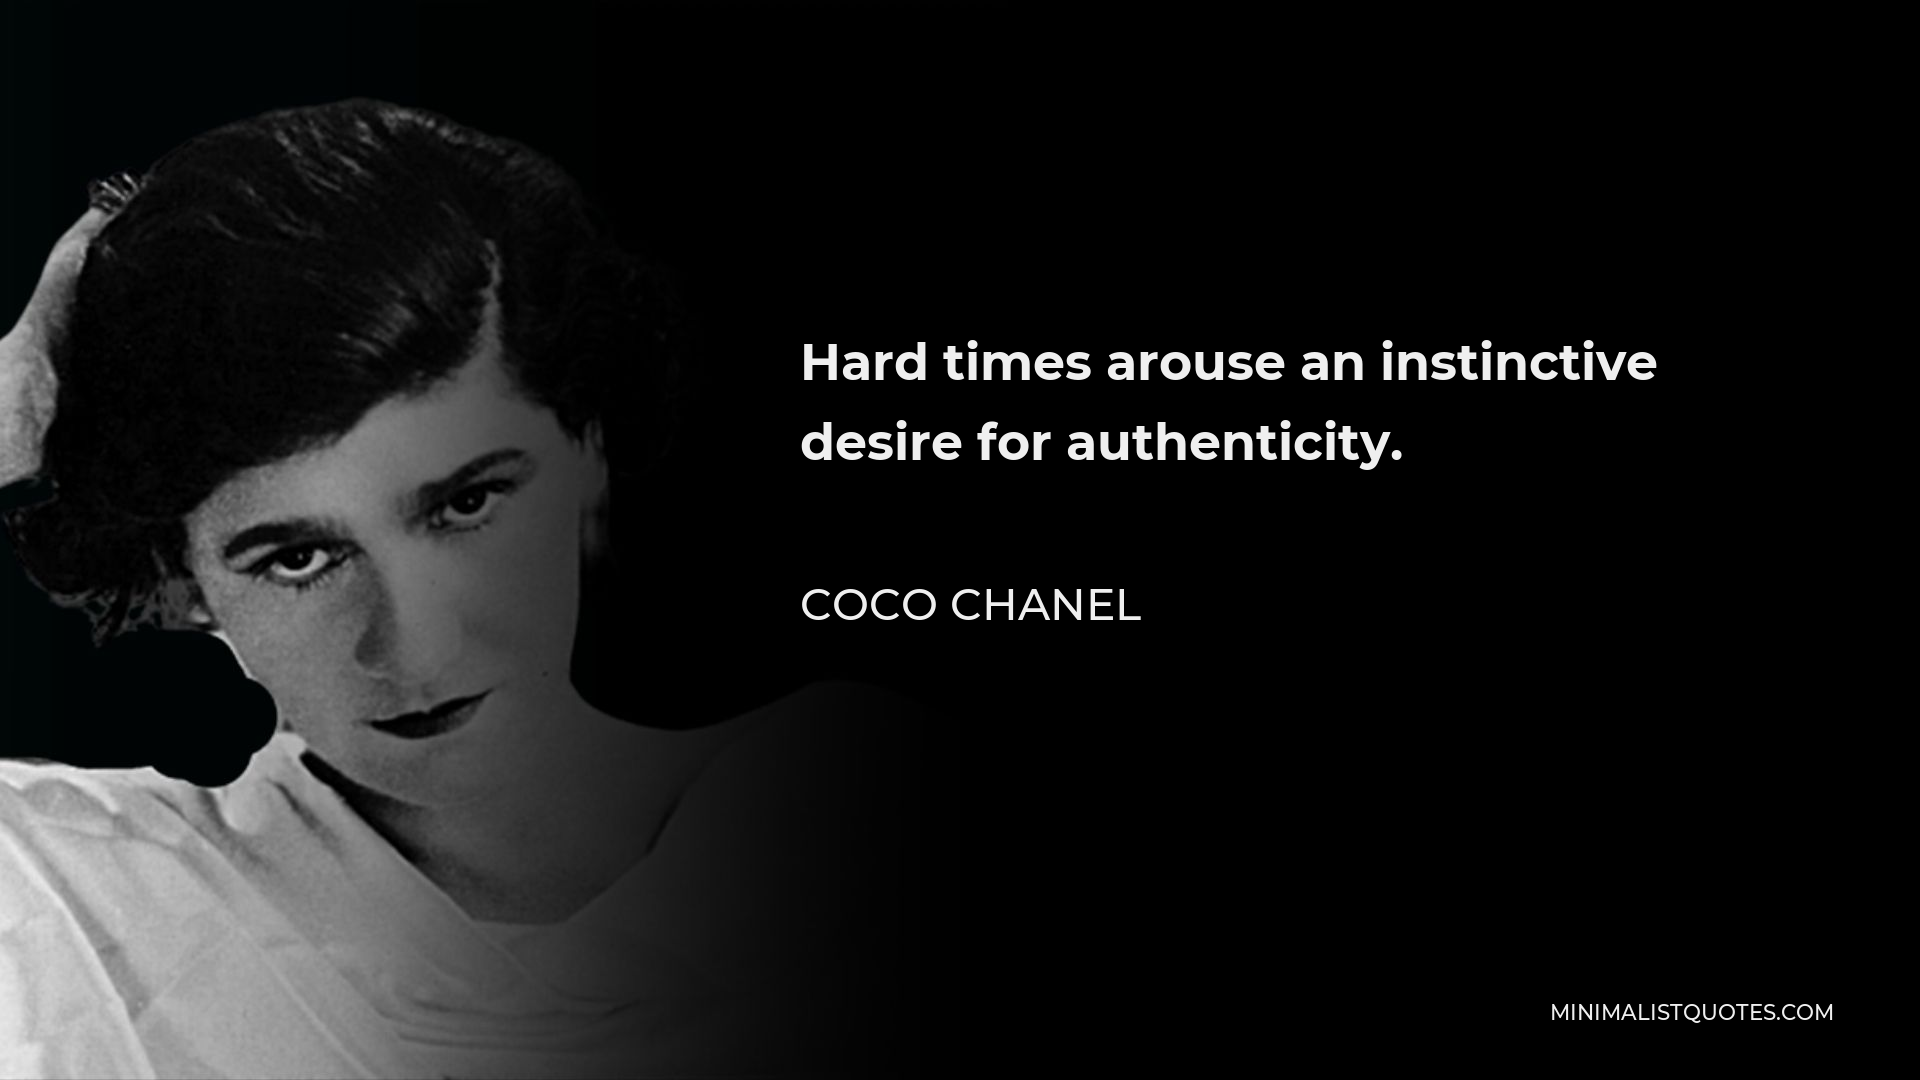 Coco Chanel Quote - Hard times arouse an instinctive desire for authenticity.